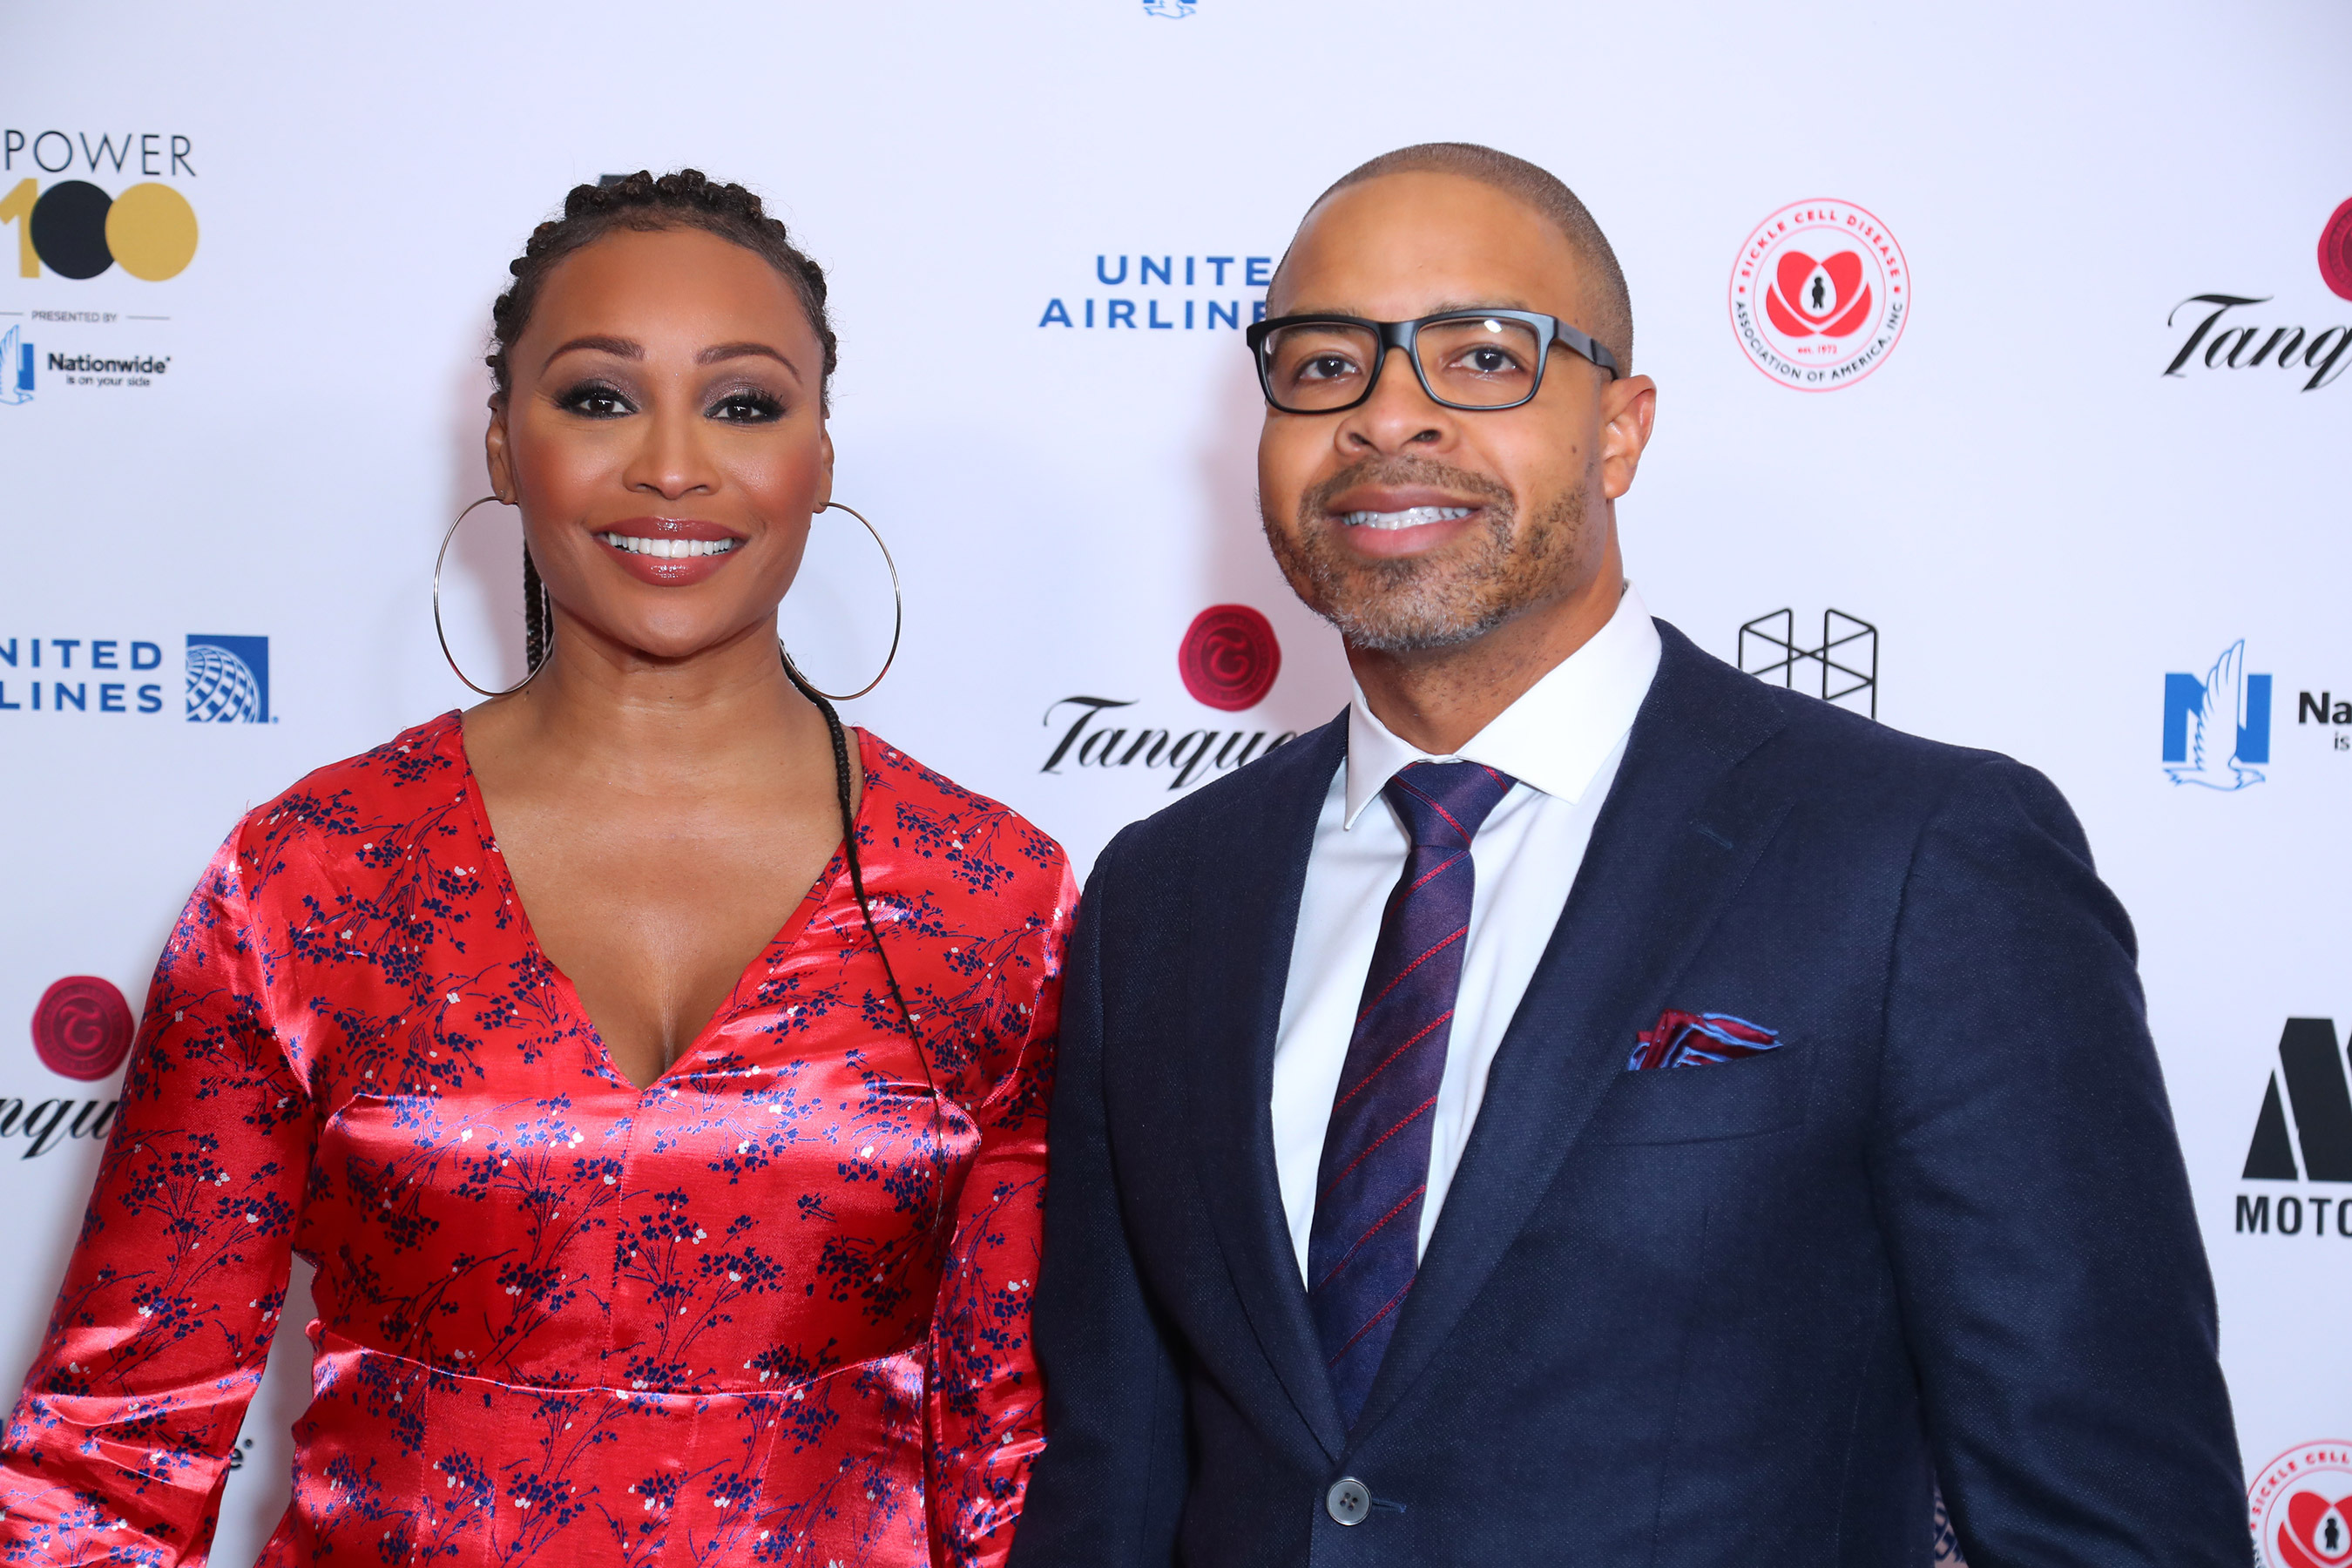 Sports Journalist and Fiancé of Cynthia Bailey on Marriage and New Book